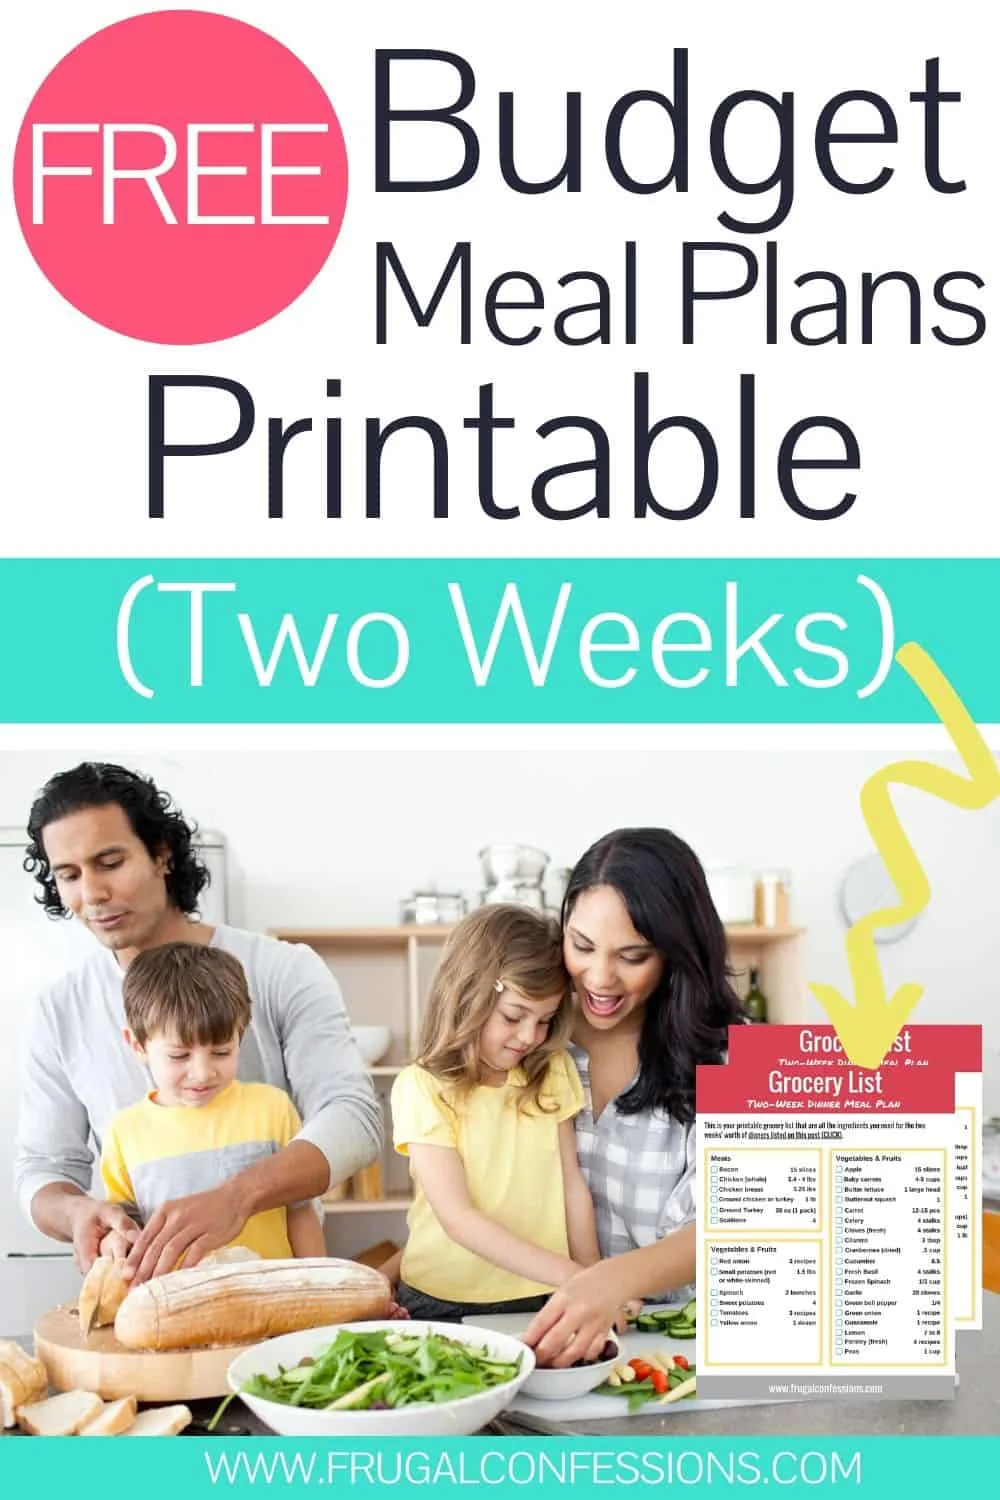 family making dinner together, text overlay "free budget meal plans printable (two weeks)"